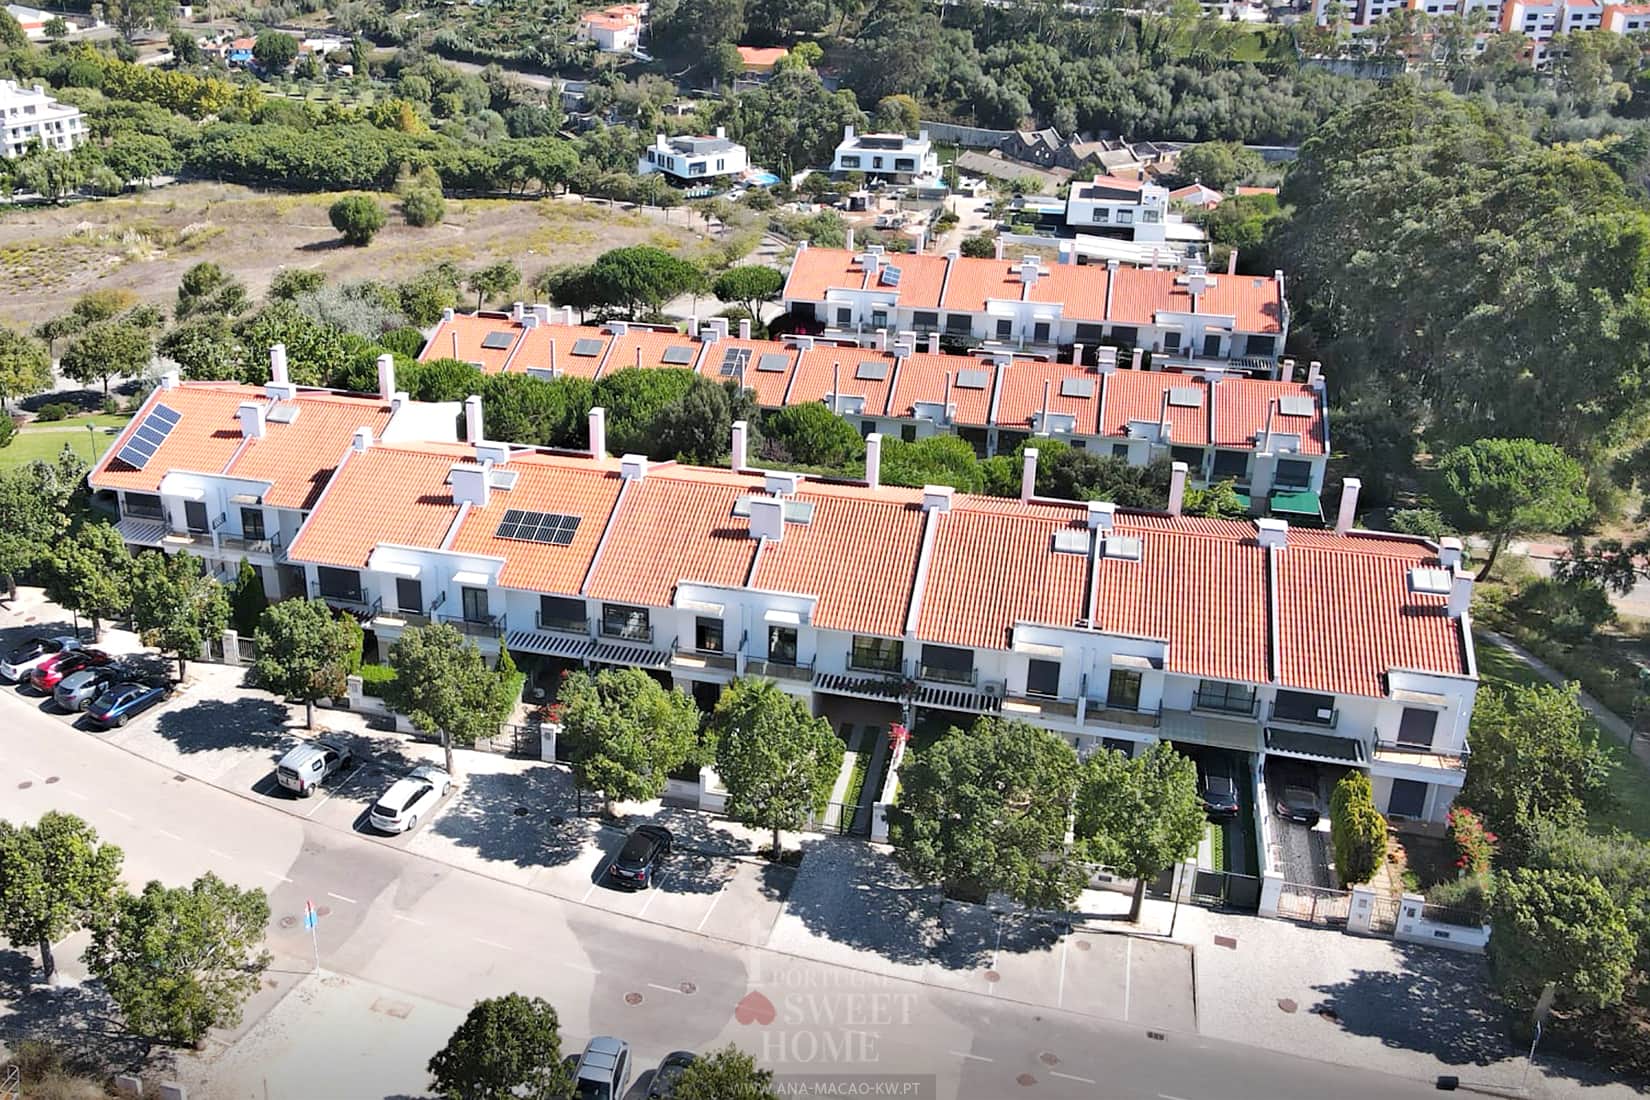 Aerial view of the townhouses